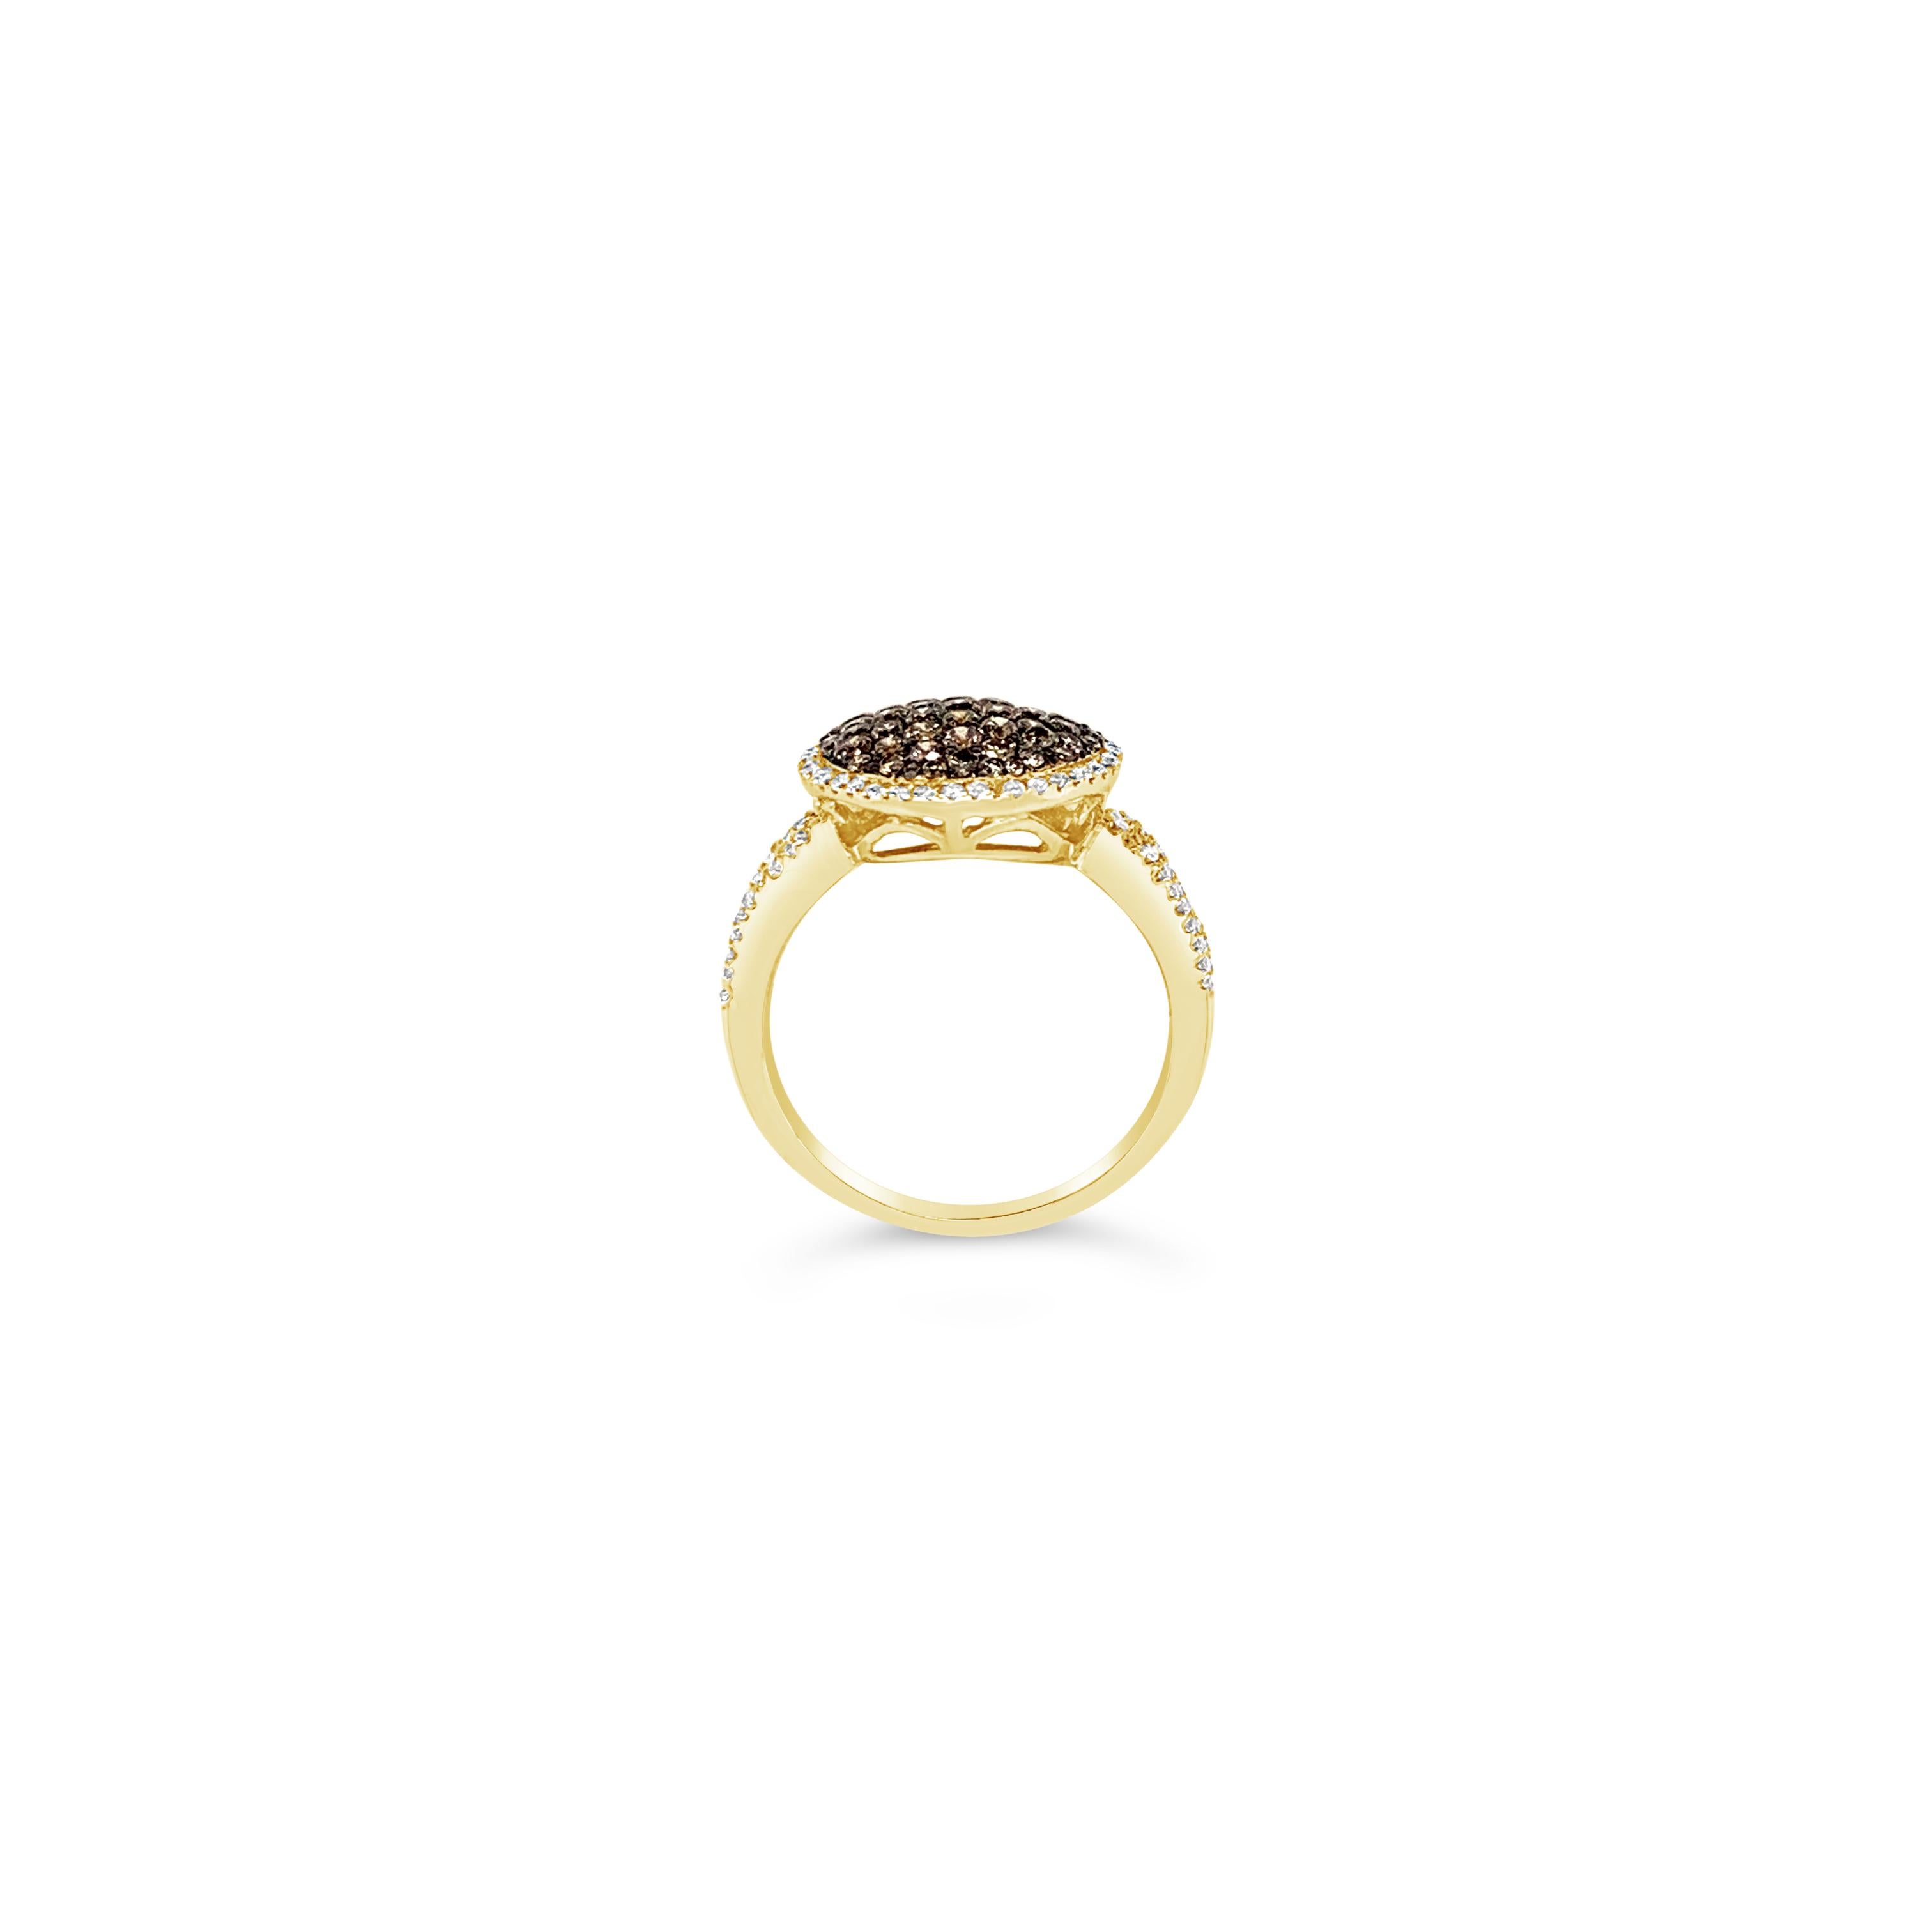 Le Vian® Ring featuring .76 cts. Chocolate Diamonds®, .23 cts. Vanilla Diamonds® set in 14K Honey Gold™

Diamonds Breakdown:
.76 cts Brown Diamonds
.23 cts White Diamonds

Gems Breakdown:
None

Ring may or may not be sizable, please feel free to